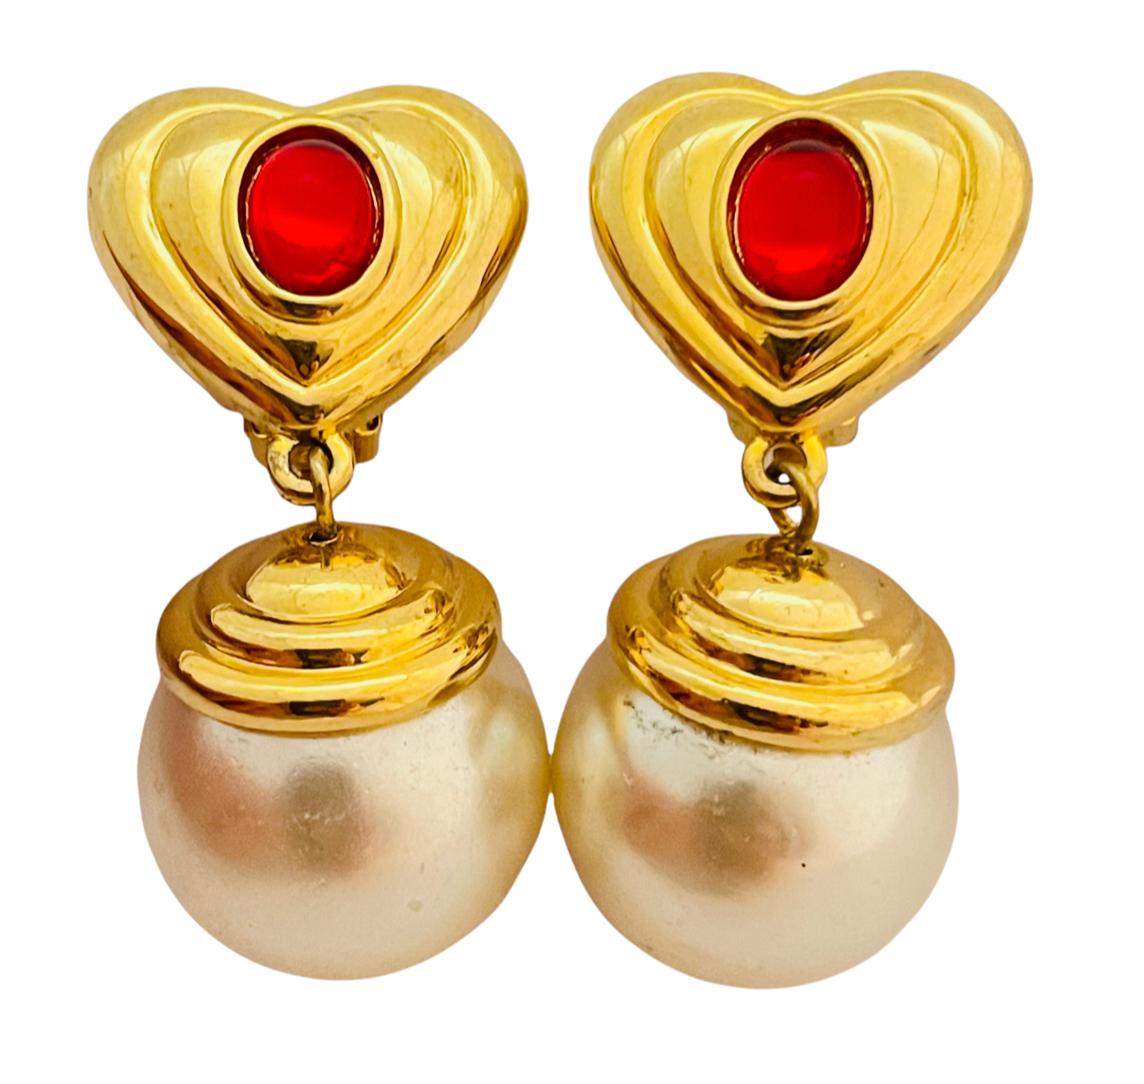 DETAILS

• Unsigned  

• gold tone with red glass and pearls

• vintage designer runway clip on earrings 

MEASUREMENTS  

• 1.75” by 0.88”

CONDITION

• excellent vintage condition with minimal signs of wear

❤️❤️ VINTAGE DESIGNER JEWELRY ❤️❤️ 